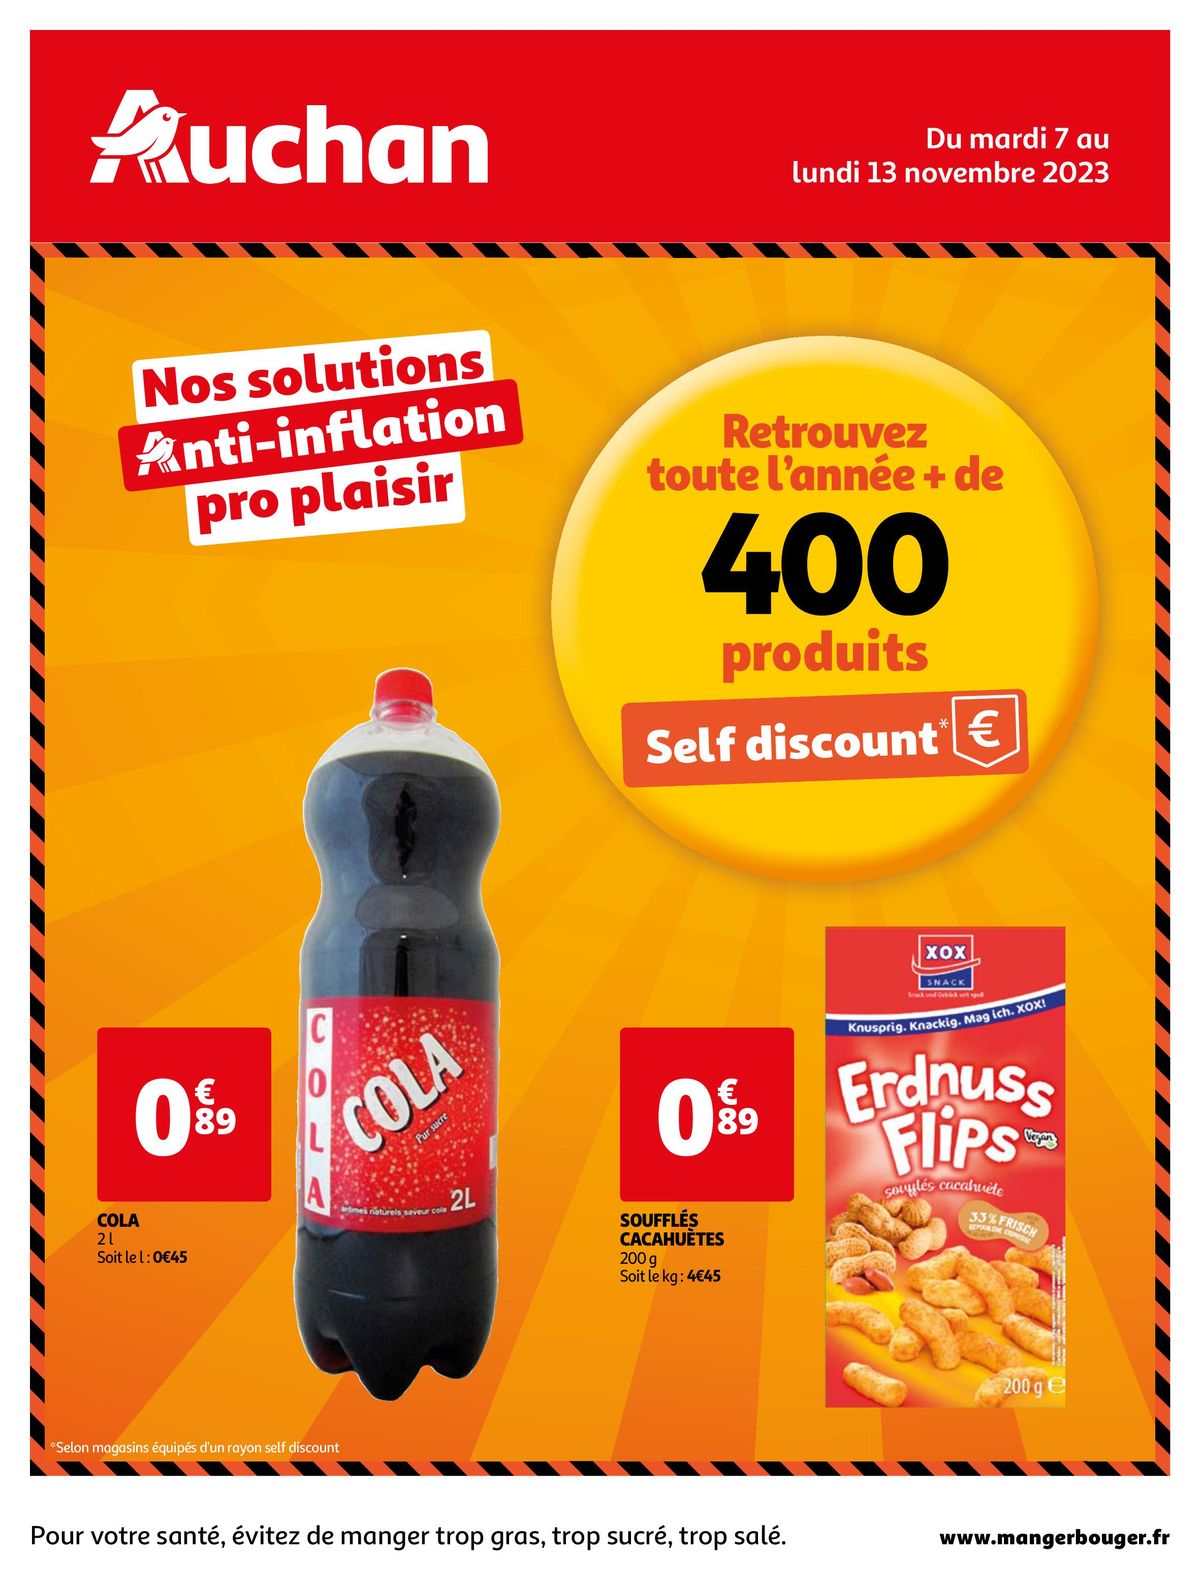 Catalogue Nos offres self discount !, page 00001